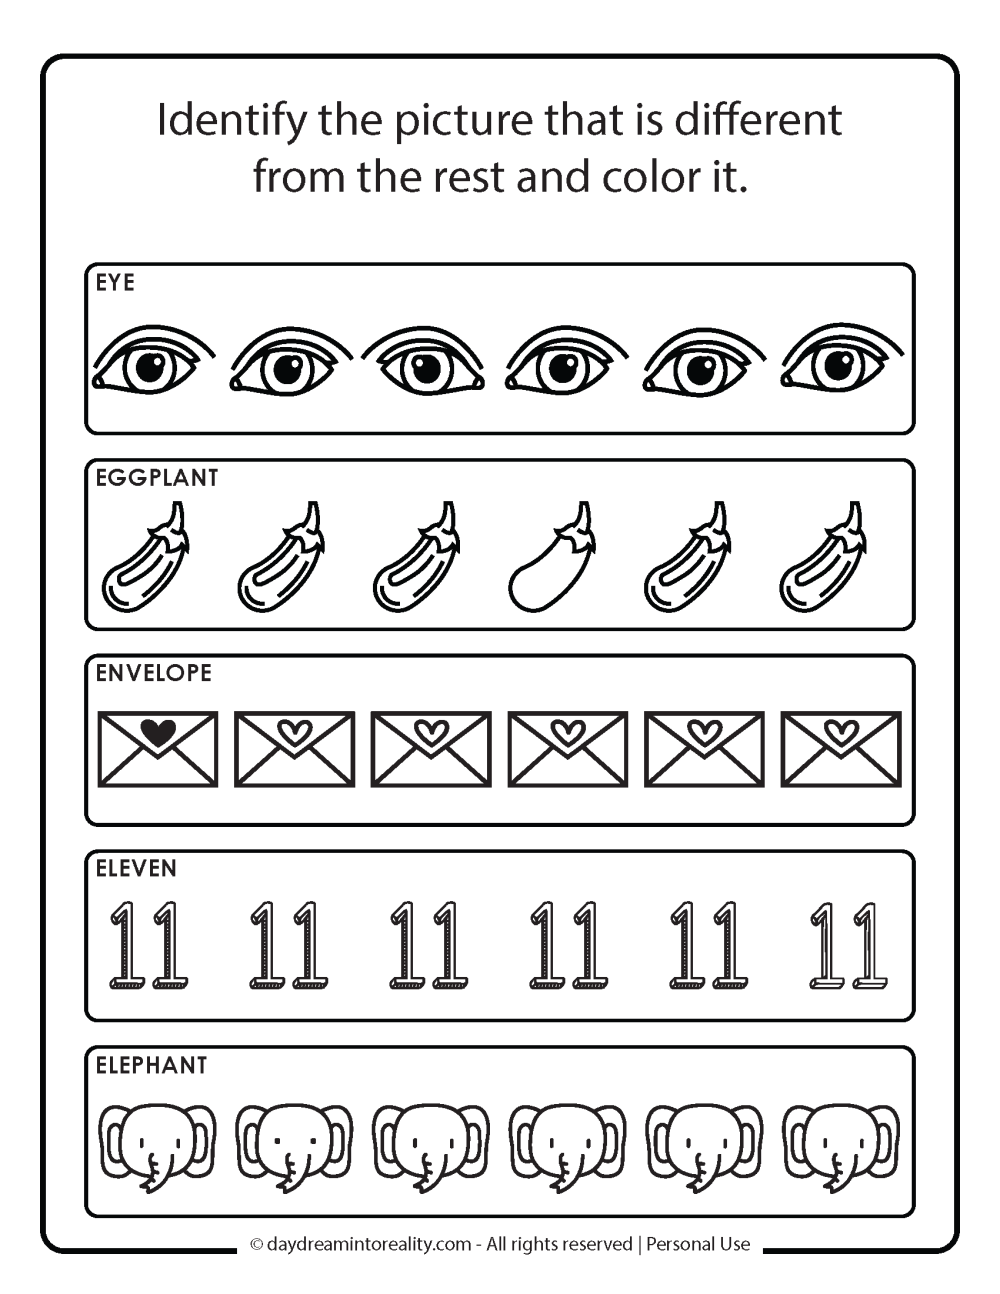 Letter E worksheet free printables. Identify the different picture.